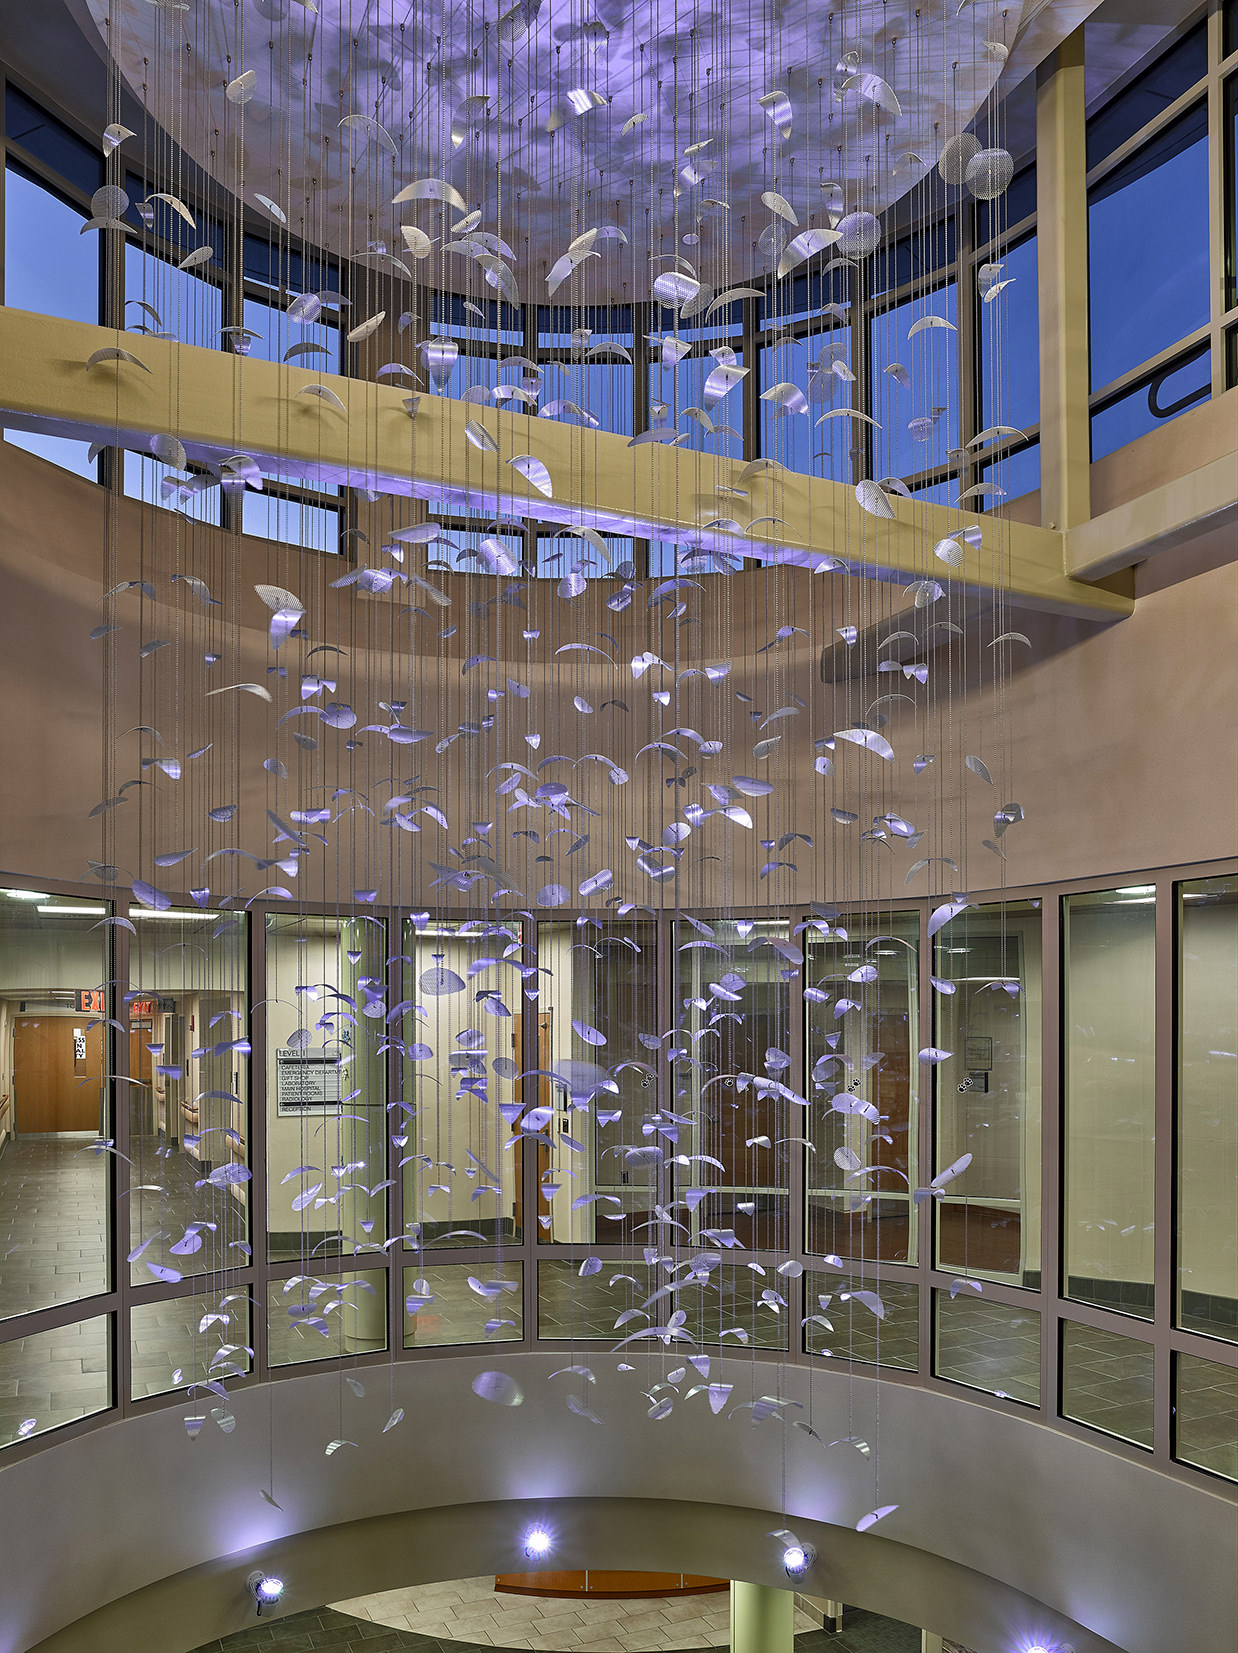 Constellation II suspended sculpture by Talley Fisher in a rotunda in Mount Nittany Medical Center.